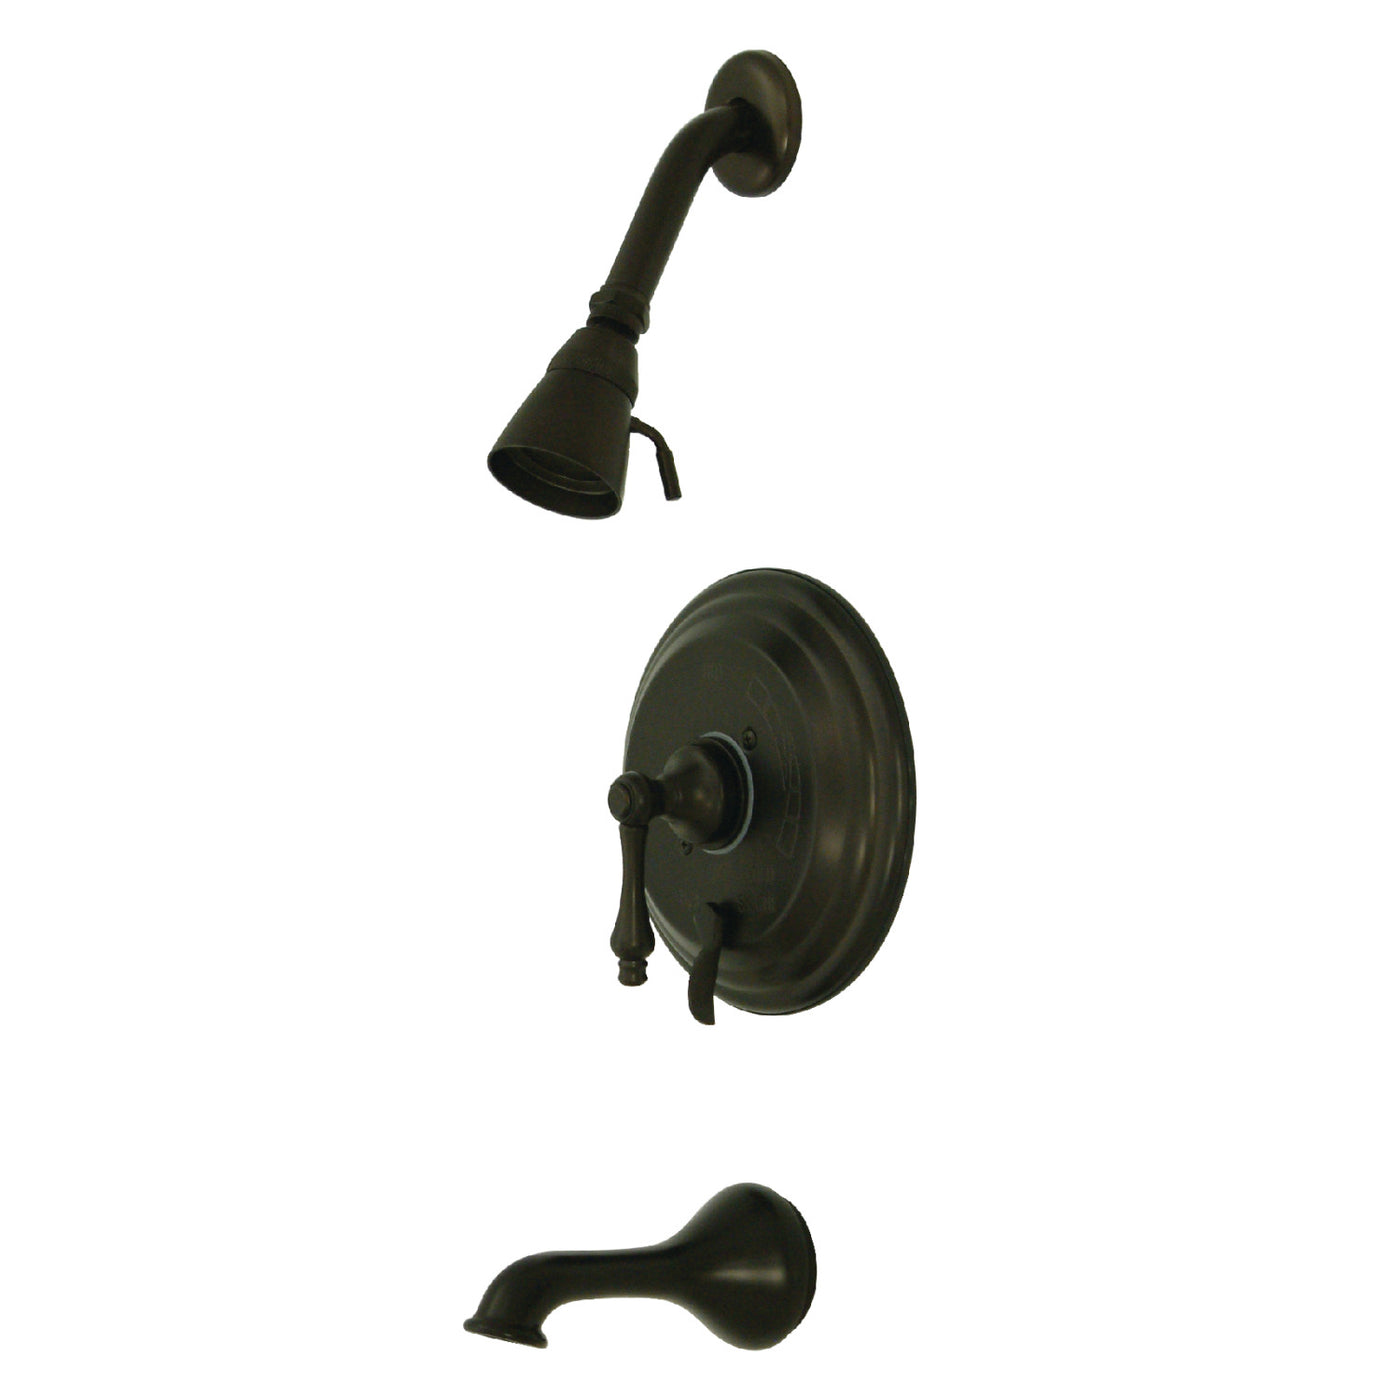 Elements of Design EB36350AL Tub and Shower Faucet, Oil Rubbed Bronze